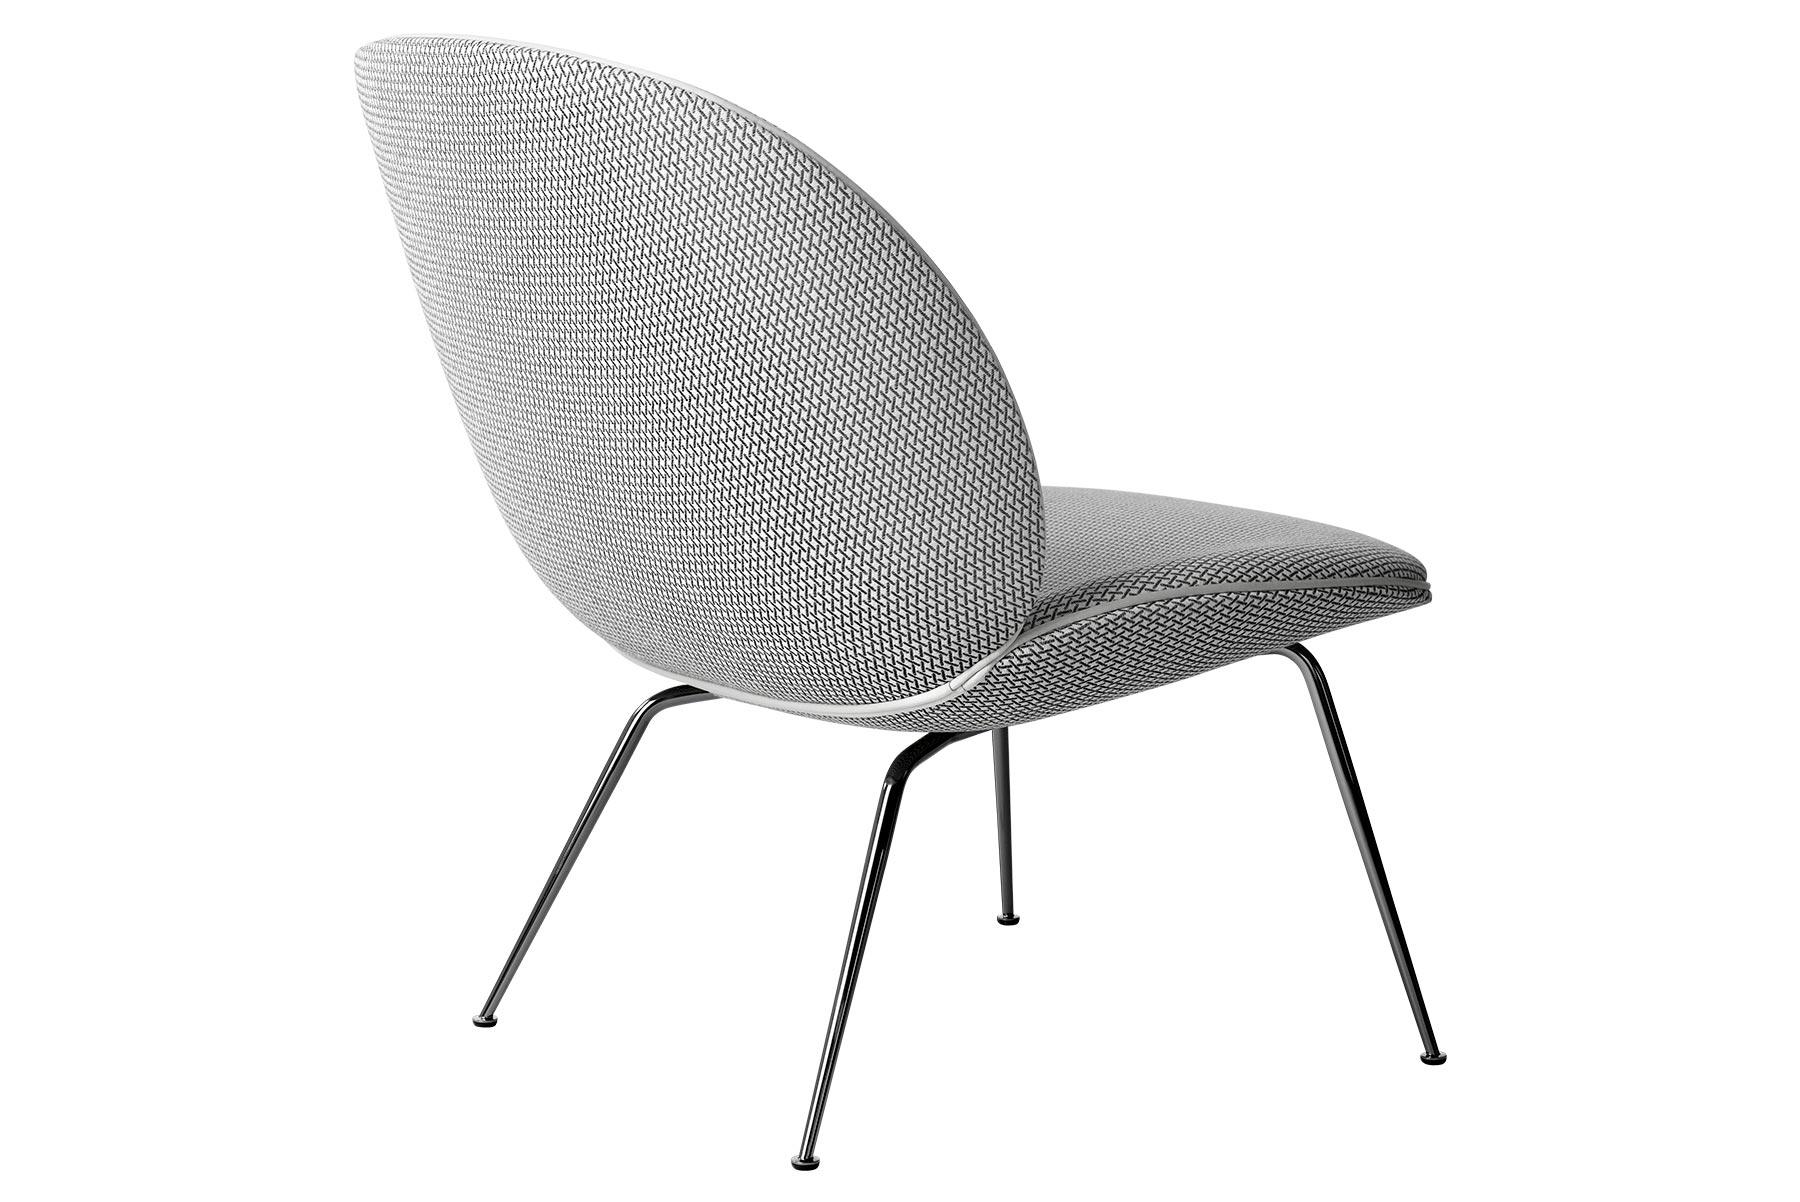 The Beetle lounge chair is with its comfortable design and generously proportioned silhouette, the perfect lounge chair for relaxation at any contemporary home. The Beetle lounge chair carries strong references to GamFratesi’s inspirational source;